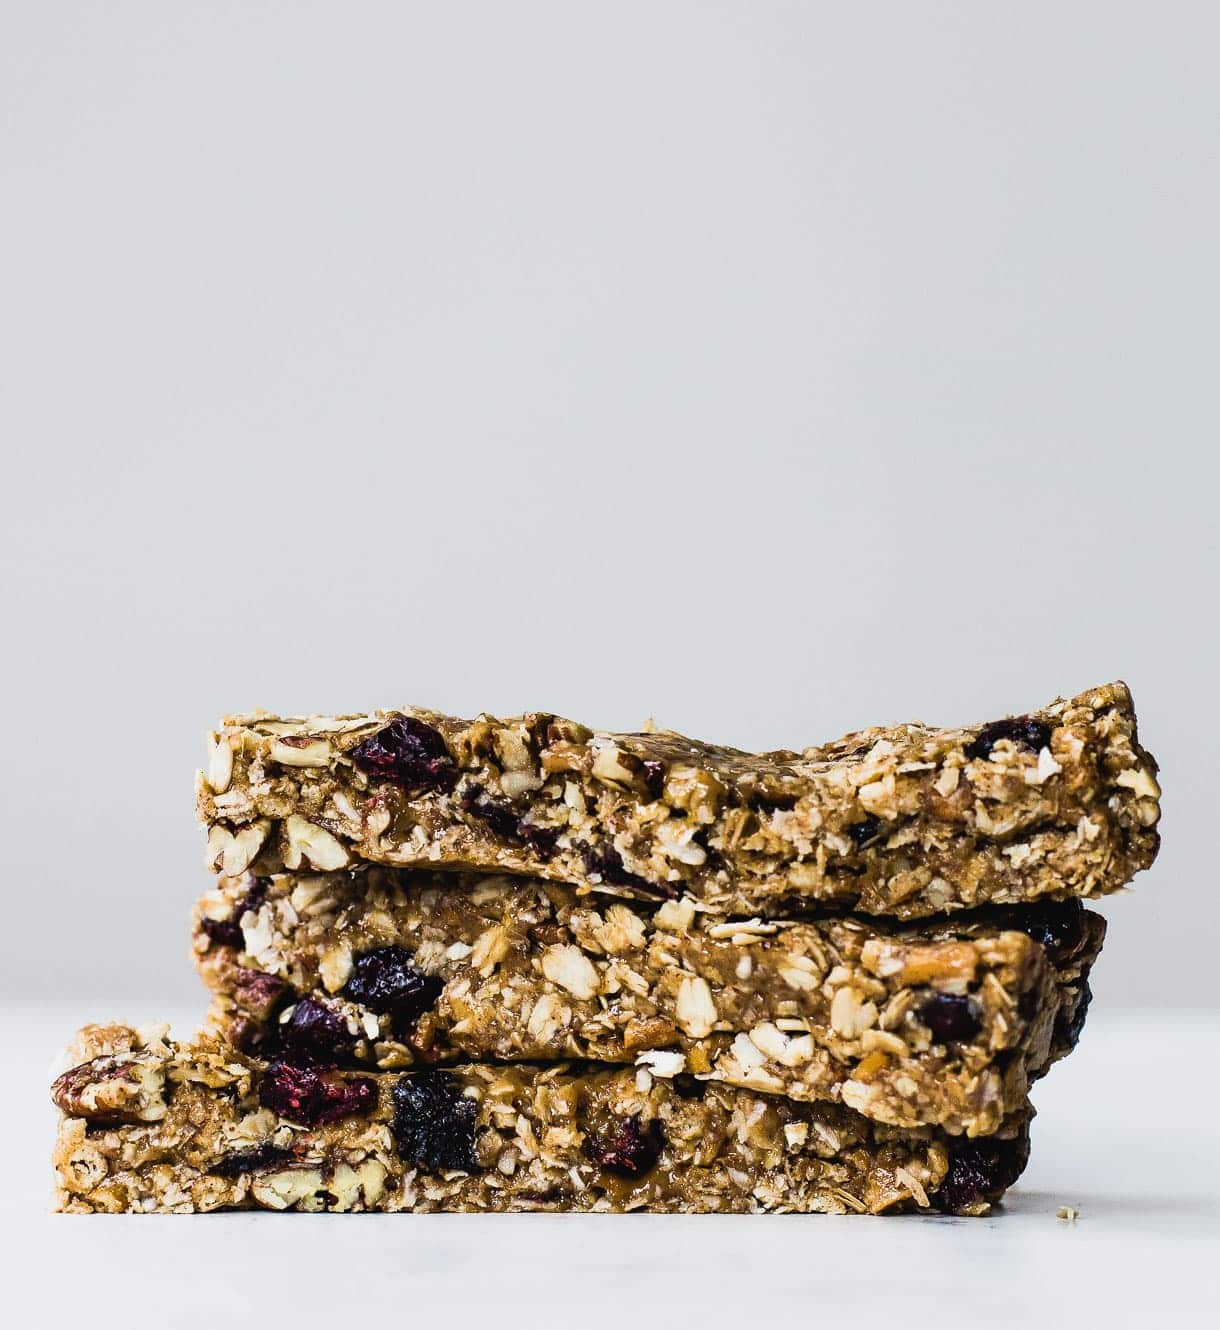 Really Chewy No-Bake Peanut Butter Granola Bars {made with brown rice syrup & honey, gluten-free, easy to make} #chewygranolabars